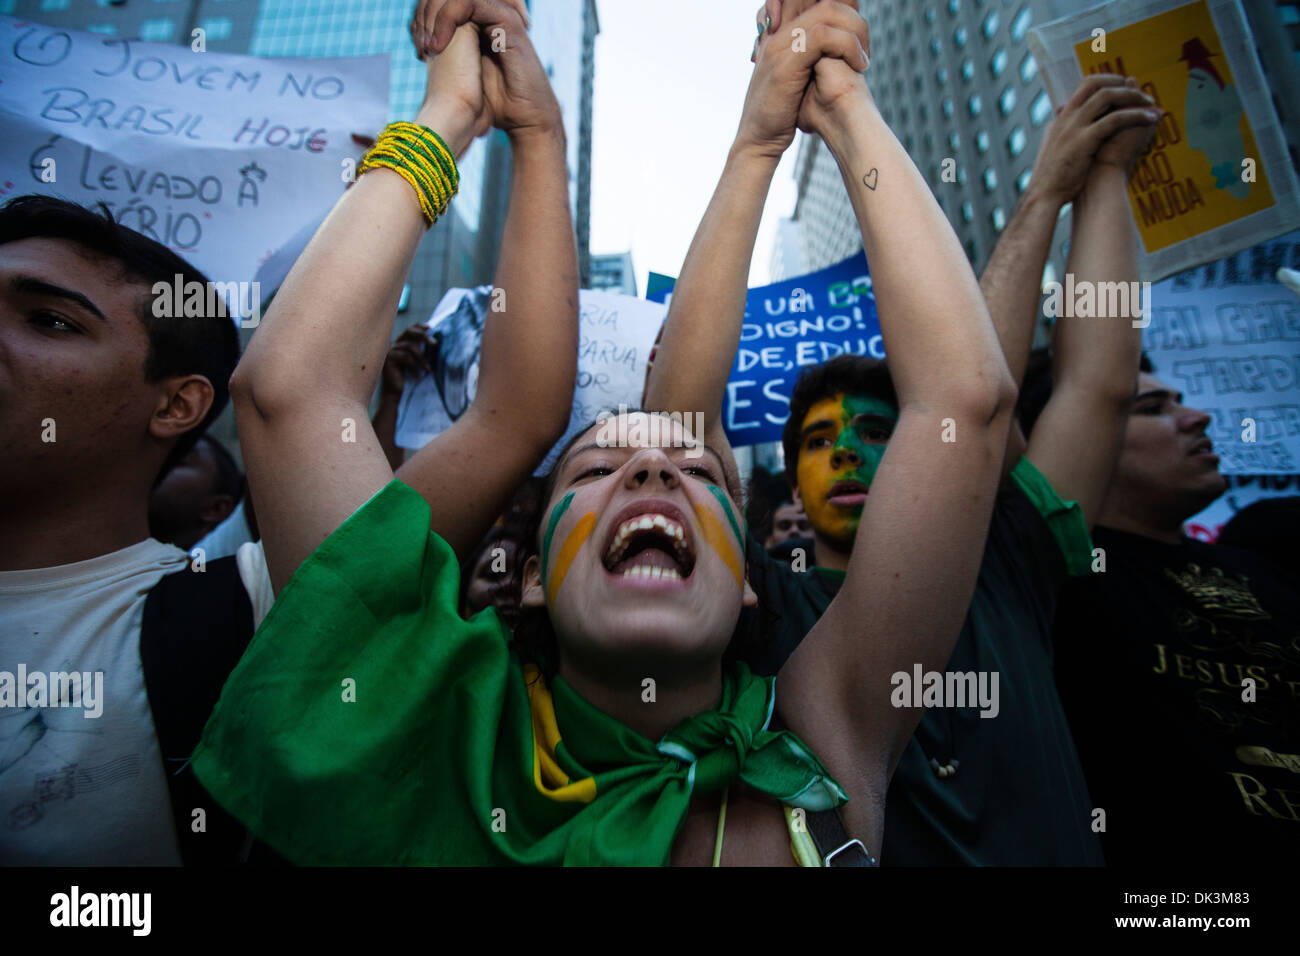 2013 protests in Brazil, Rio de Janeiro downtown, June 20, 2013 Young people scream words against Brazilian Government activism Stock Photo